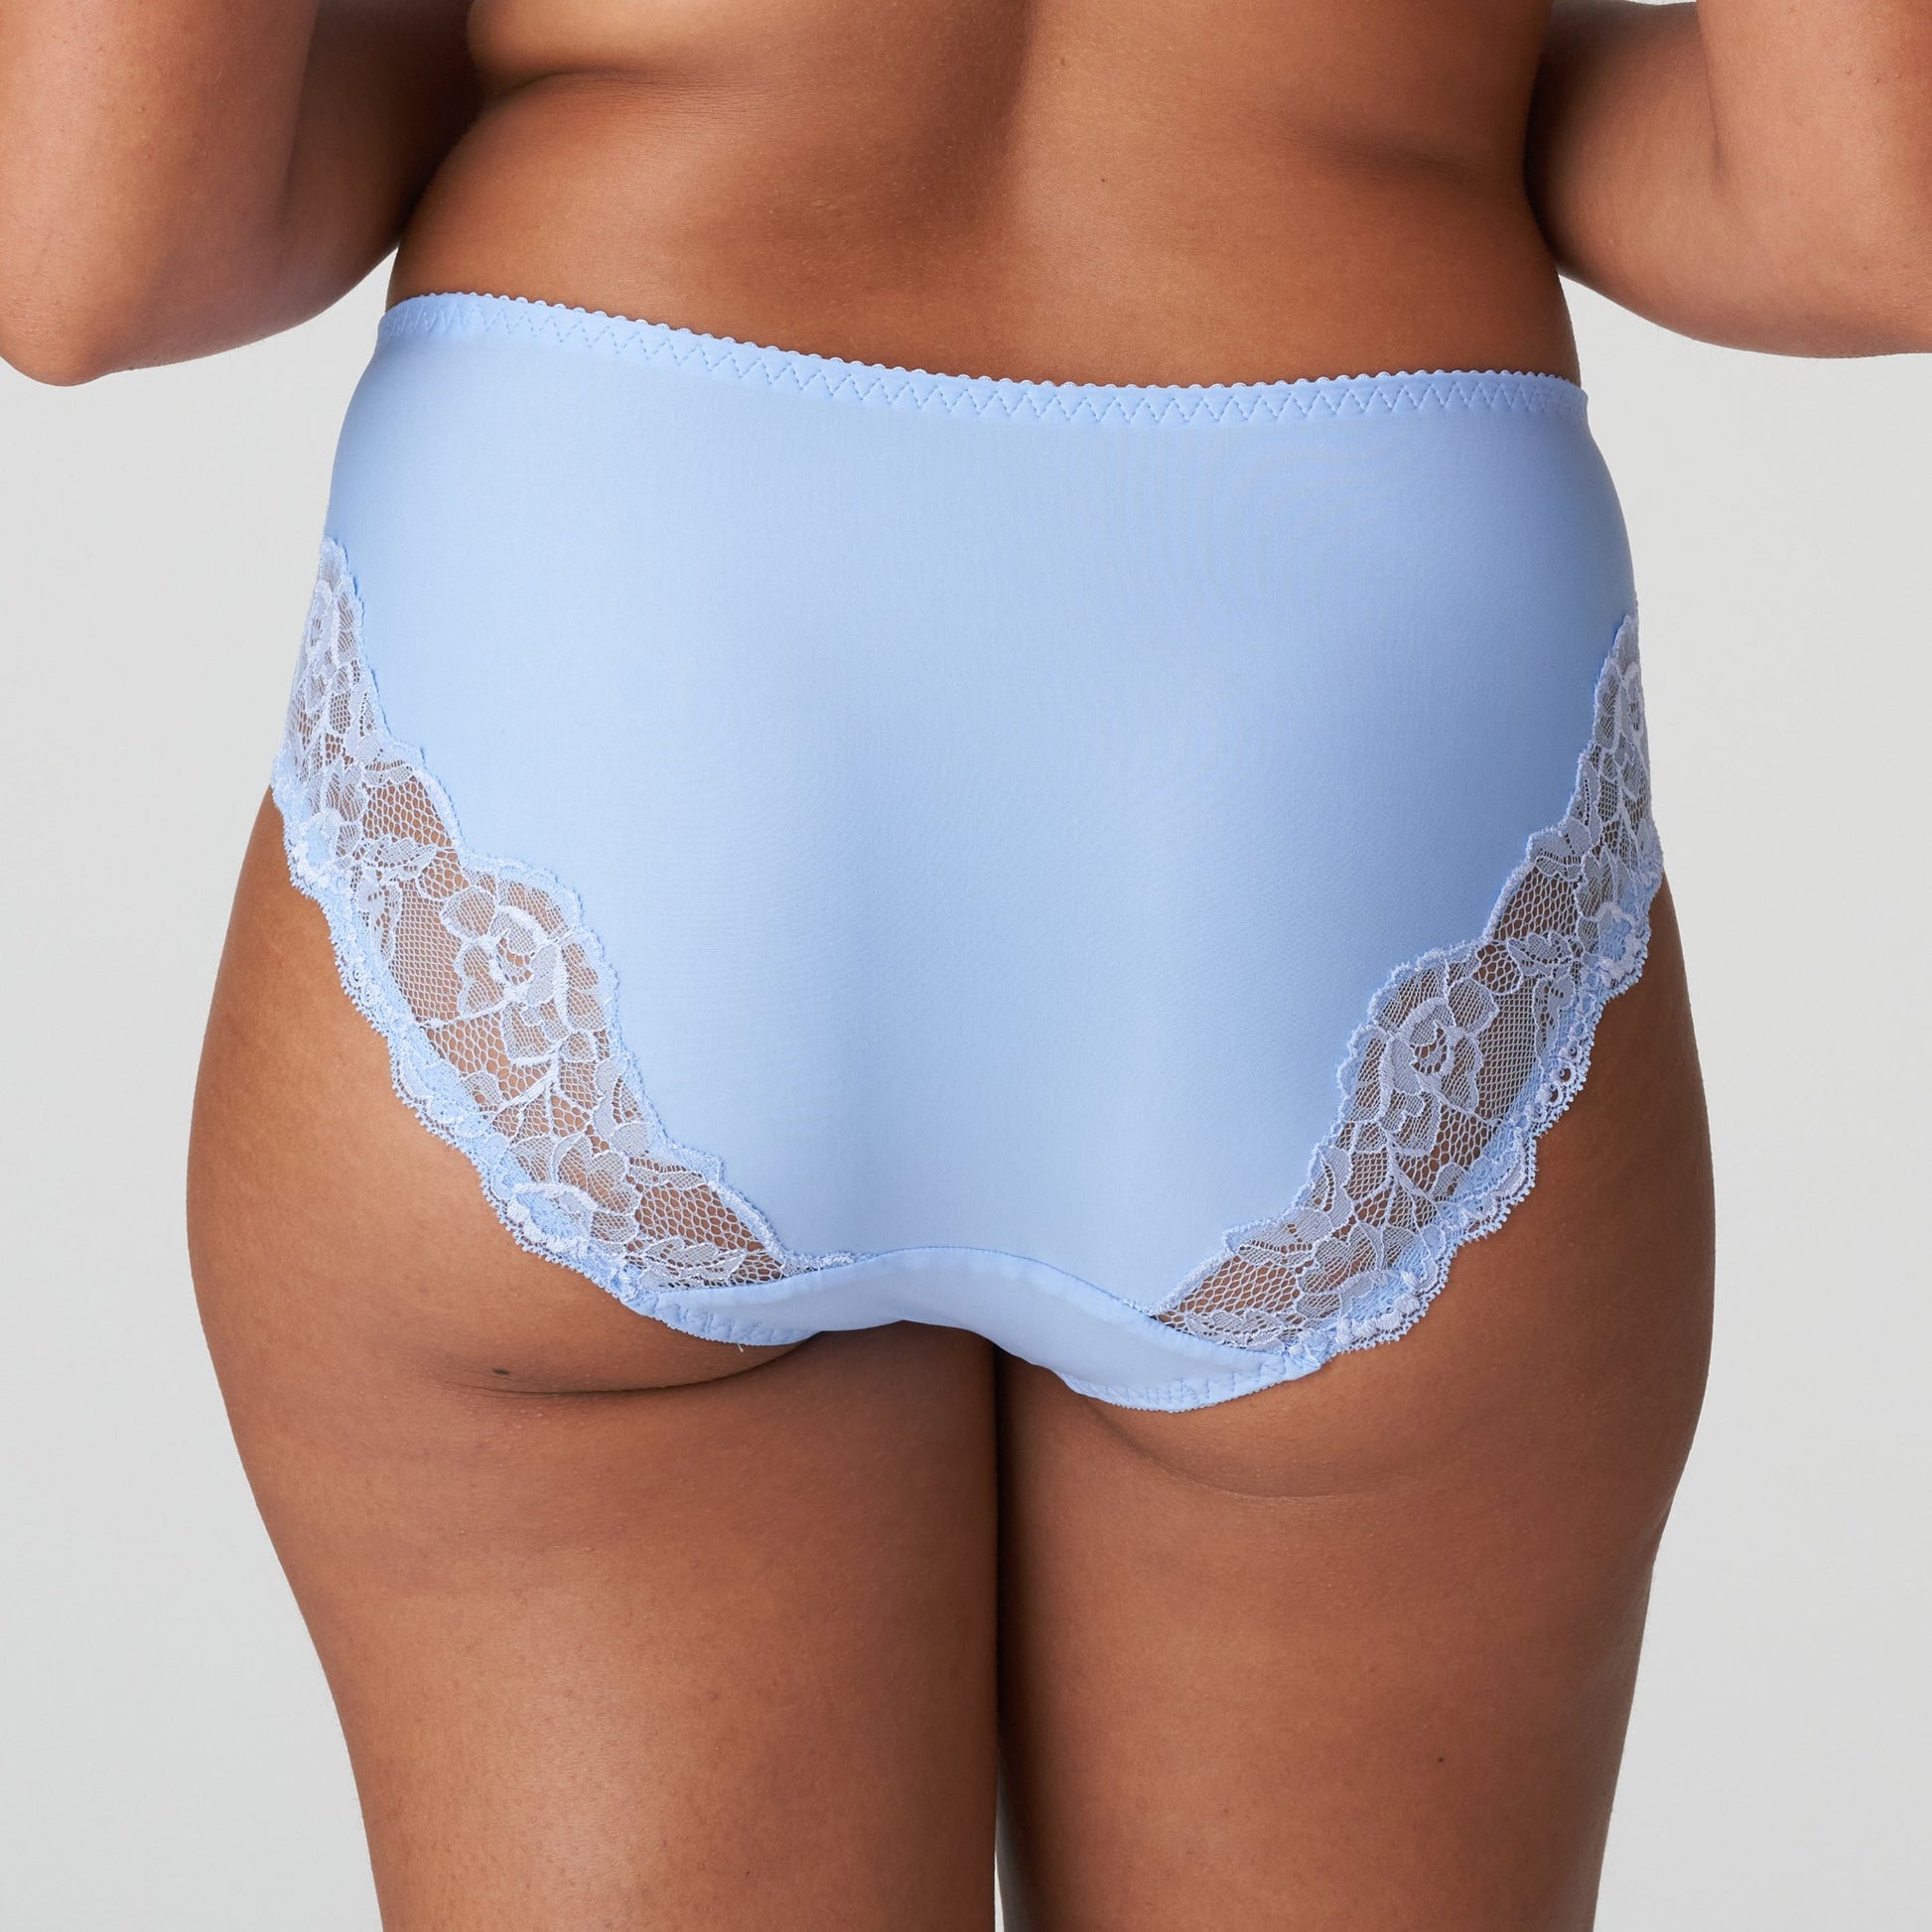 Back view of a woman wearing the Madison Full Brief panty in Periwinkle Floral by PrimaDonna.